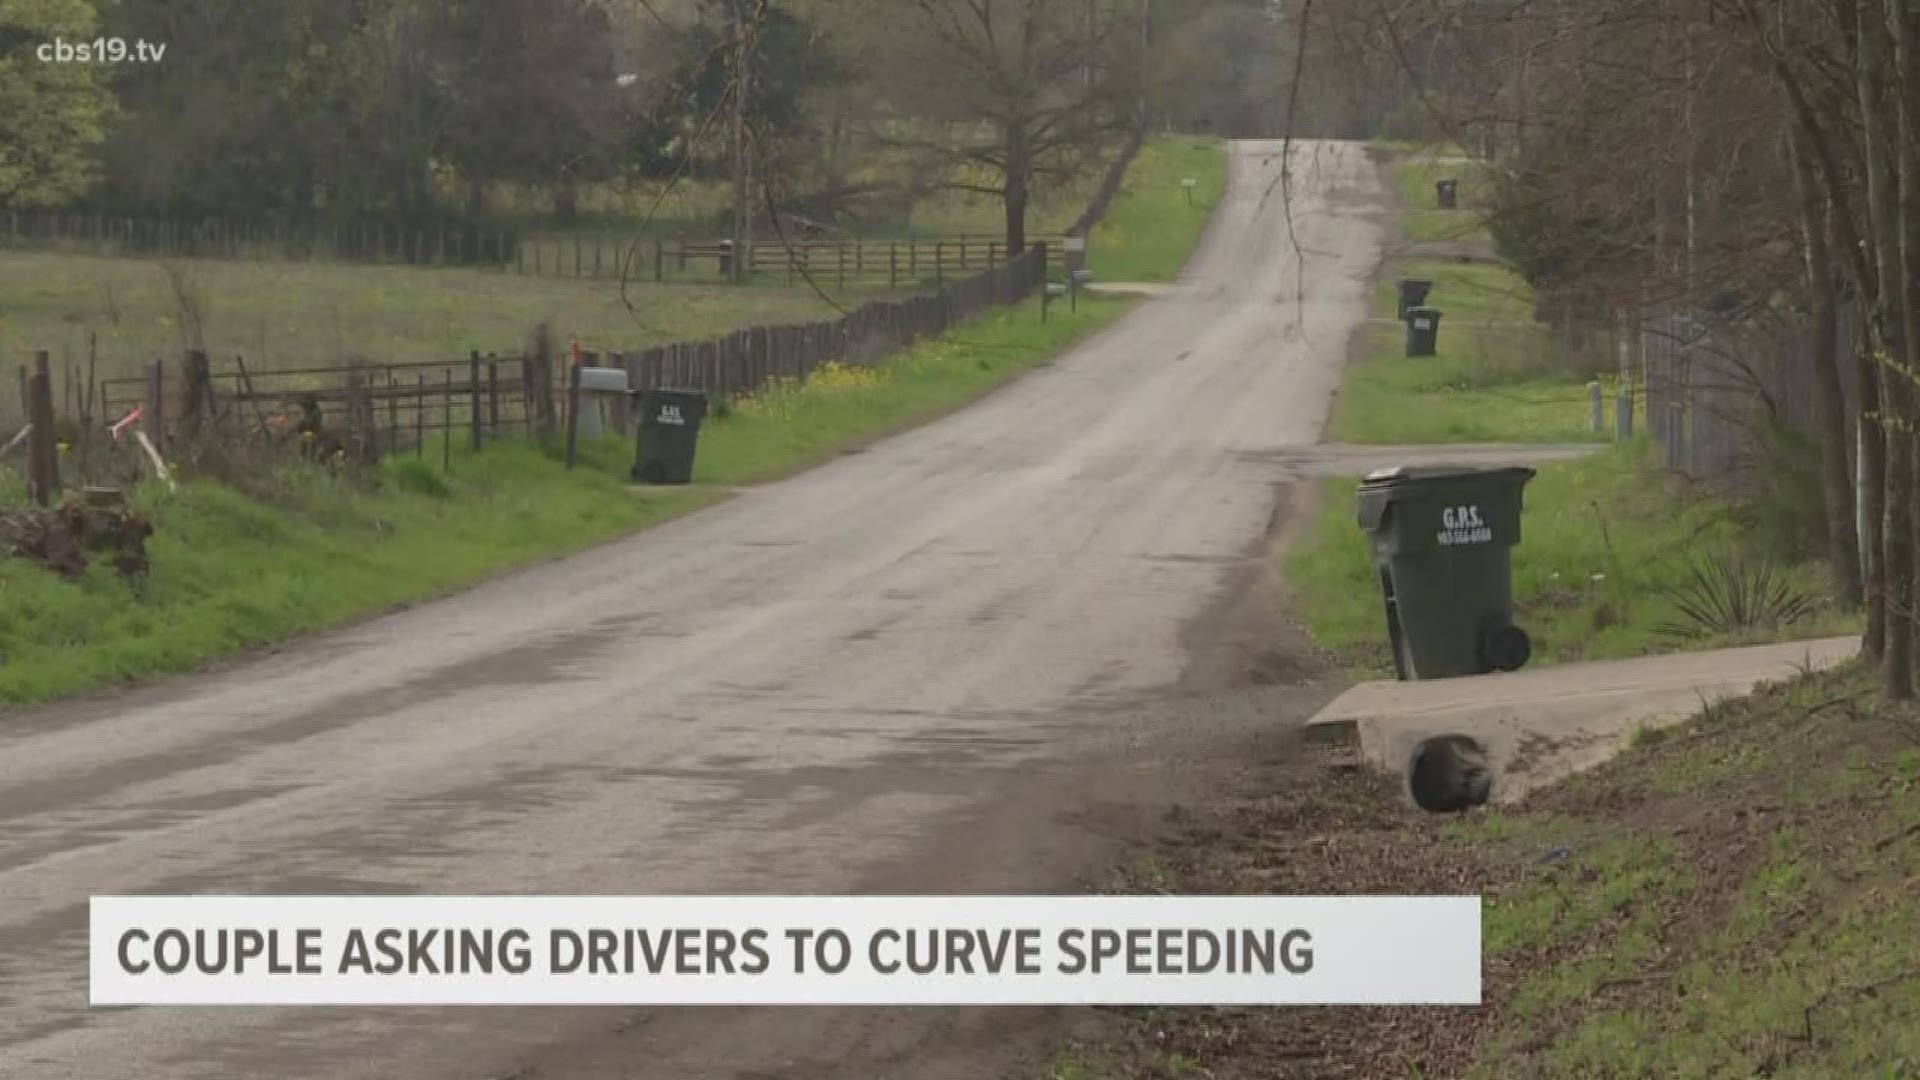 The couple is asking drivers to slow down at the curve on County Road 433 in Lindale.